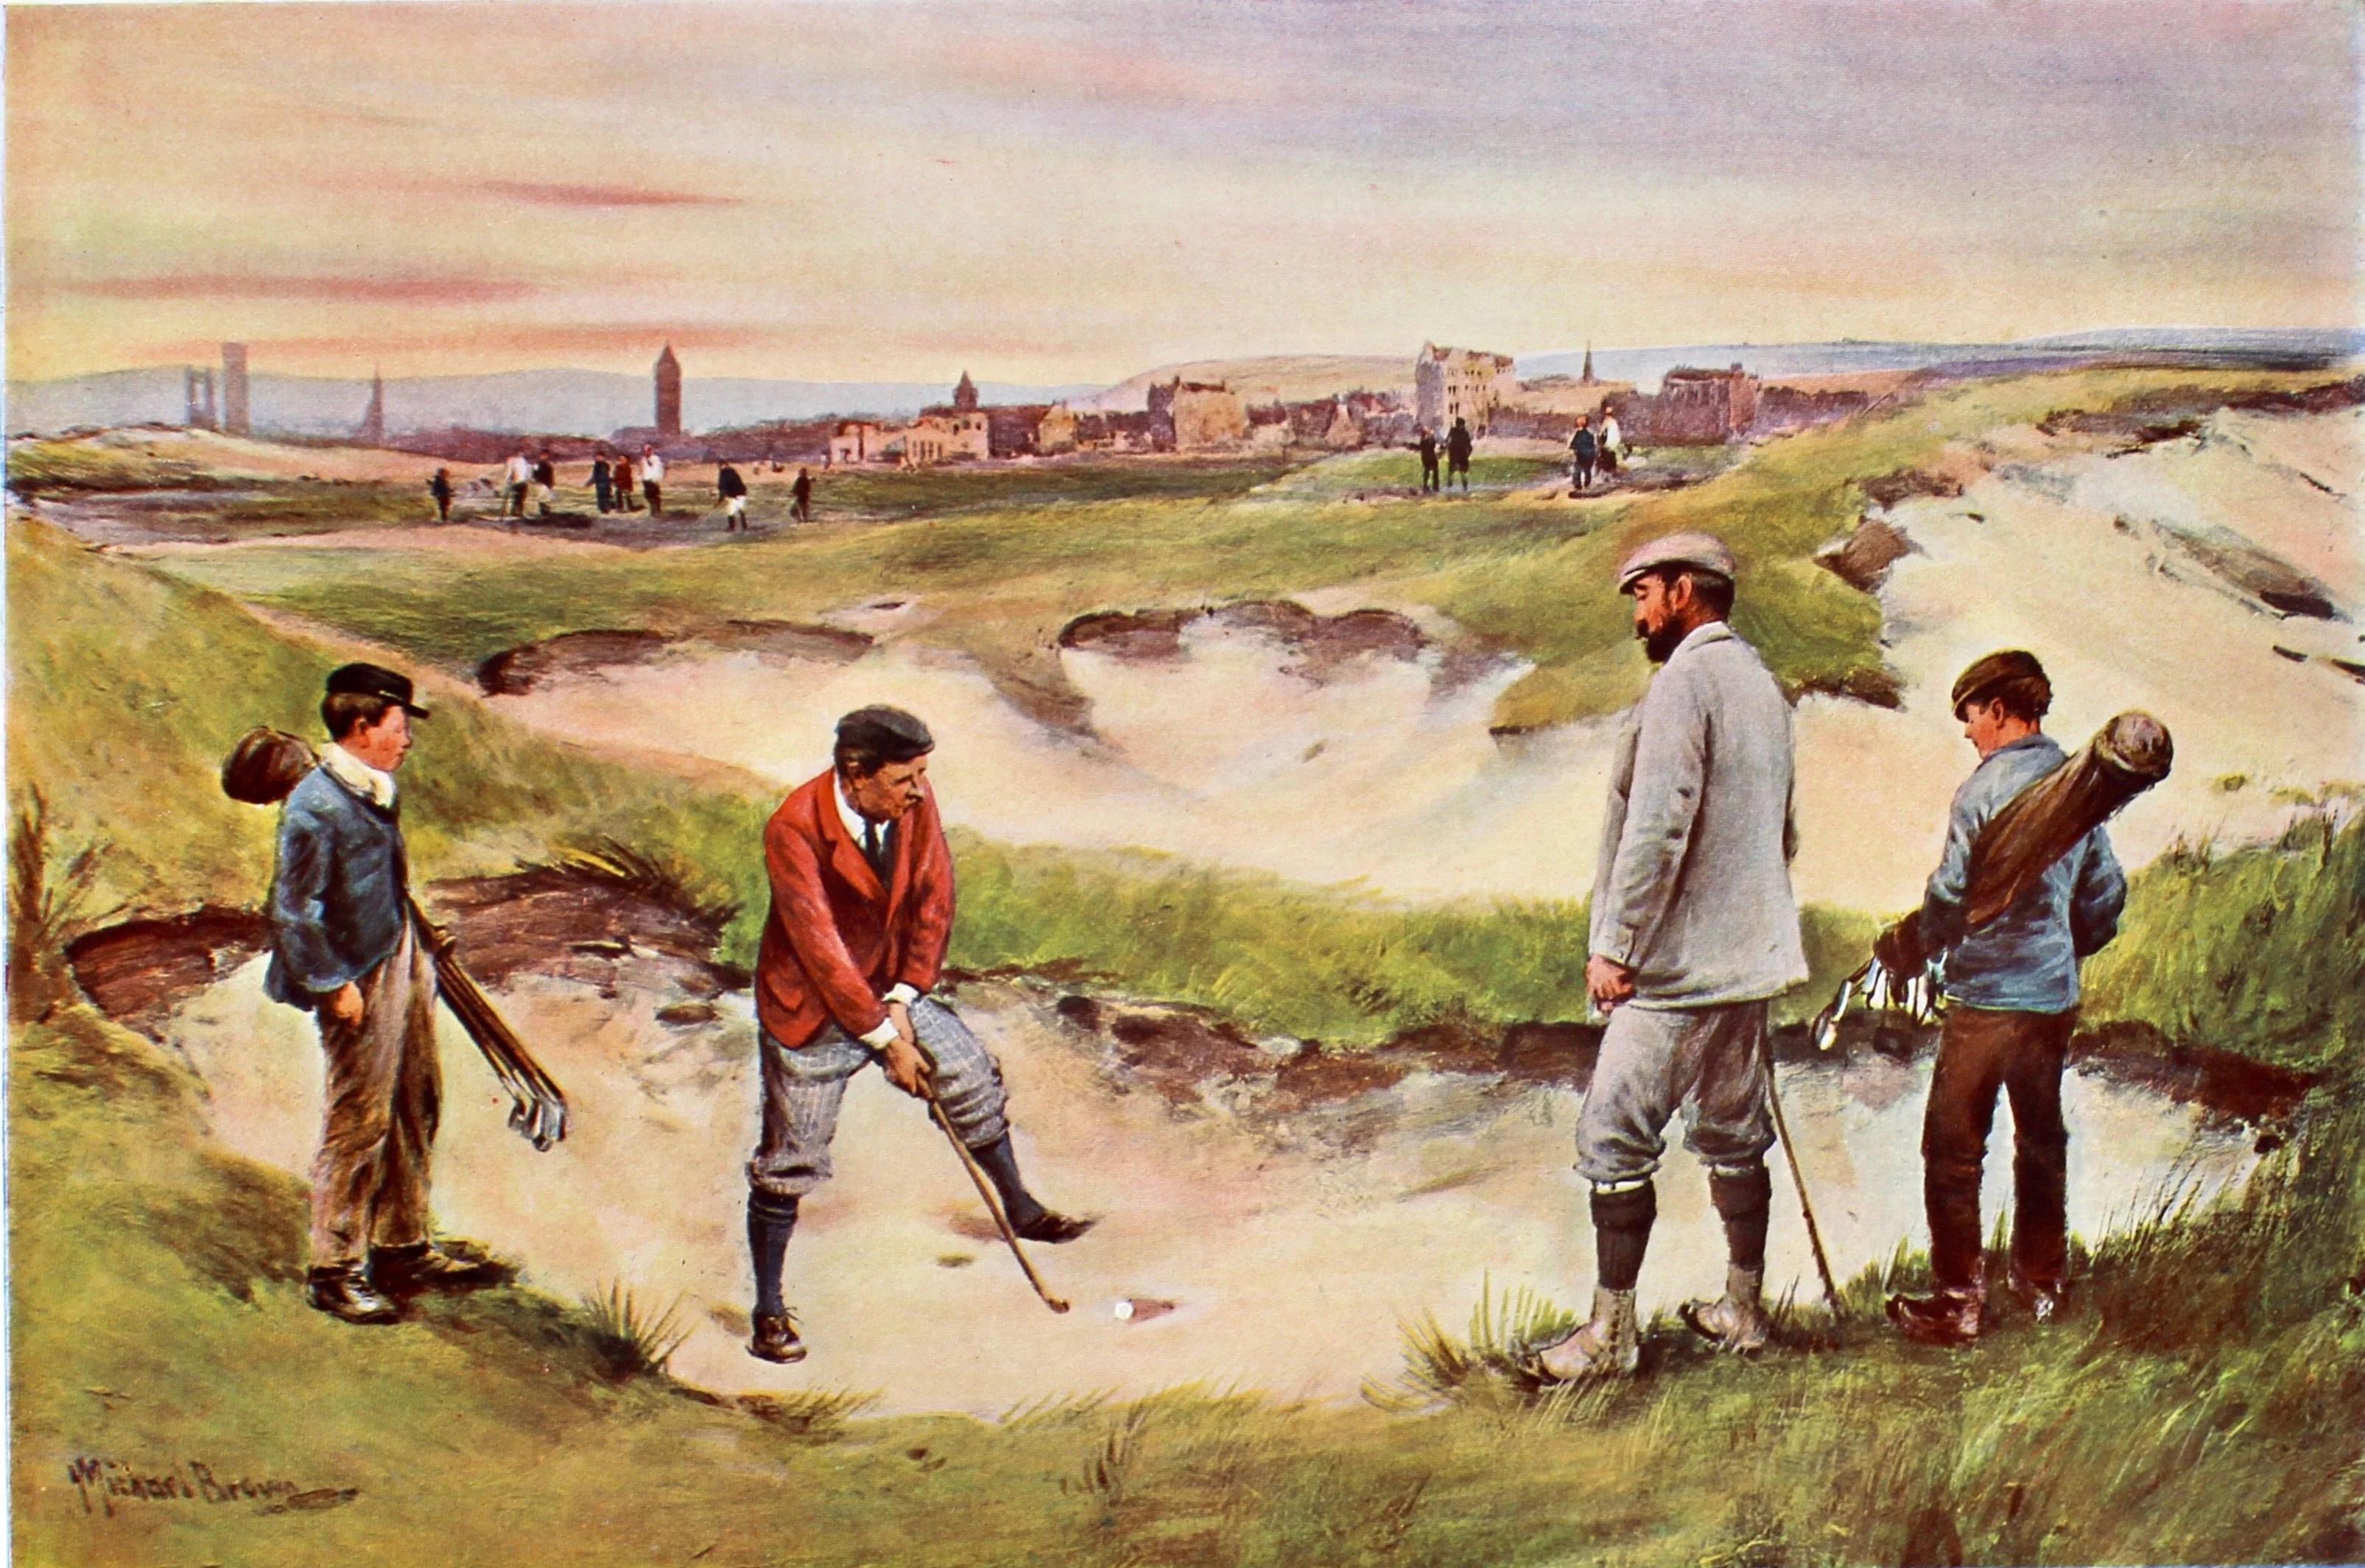 Presented is a color photogravure by James Michael Brown entitled “In the Sand”. The print depicts two golfers with their young caddies on the historic St. Andrews golf course. One player is 